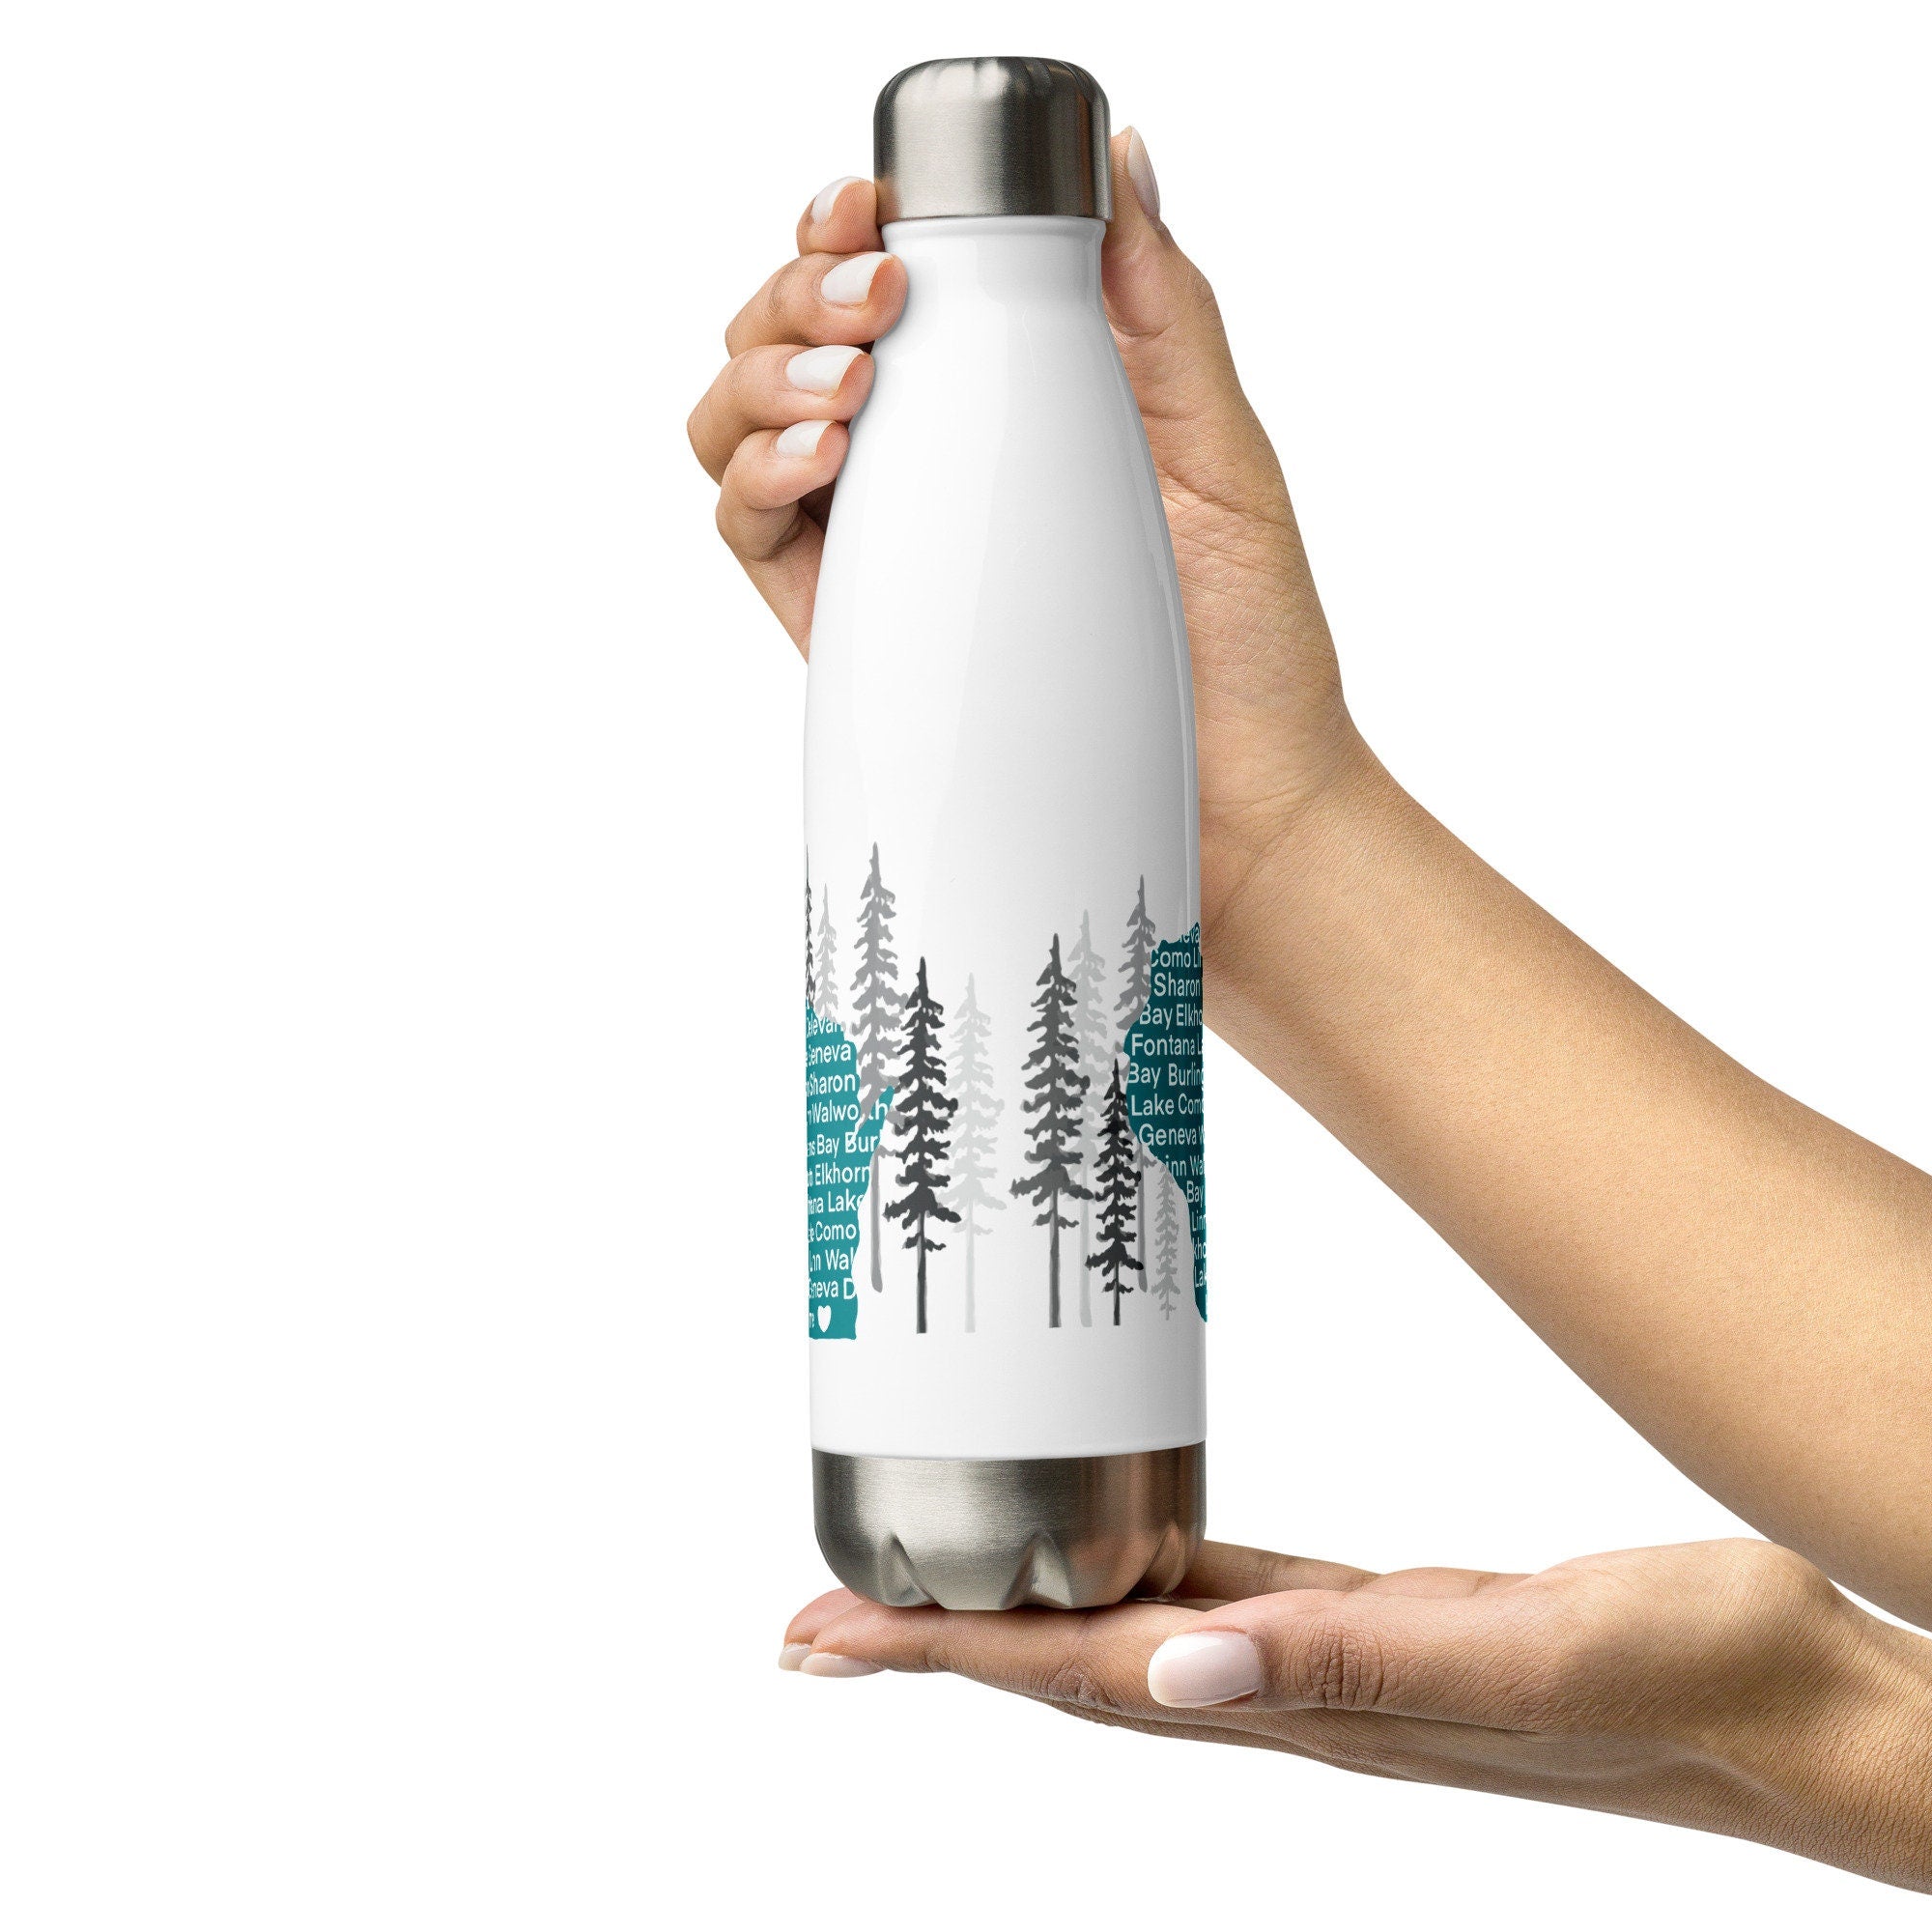 Geneva Lake Map Water Bottle Stainless Steel -Lake Geneva Area Towns Cities you are here Location - Williams bay Fontana Trees Lake Teal